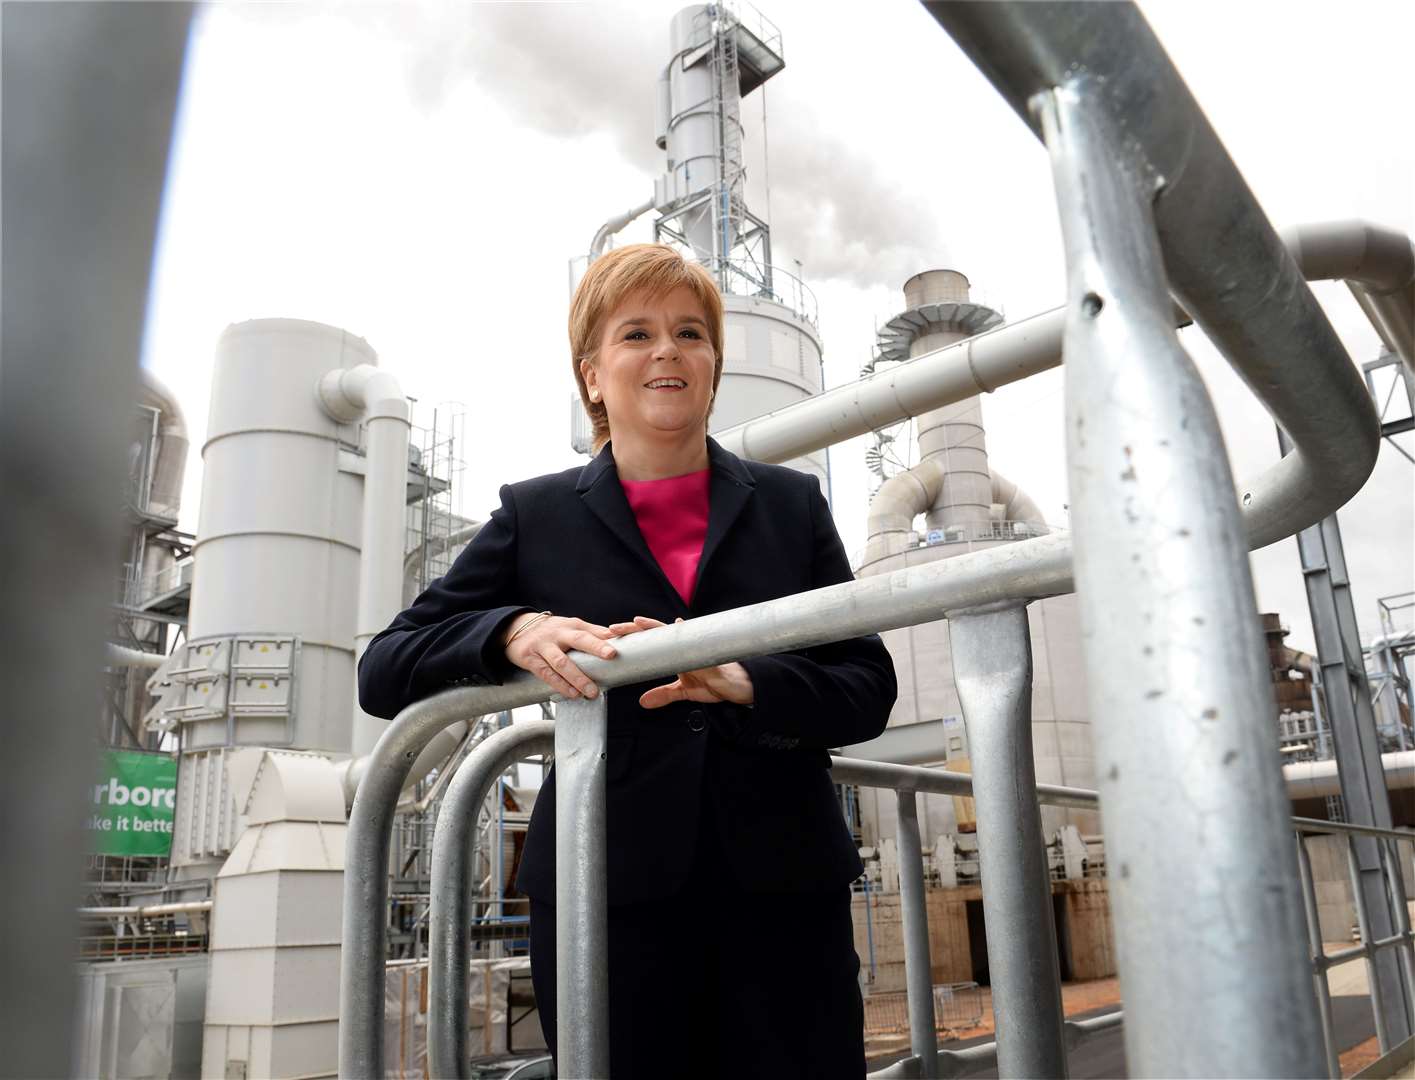 Sandstone Press will publish a book of selected speeches from First Minister Nicola Sturgeon in May. Picture: Gary Anthony.